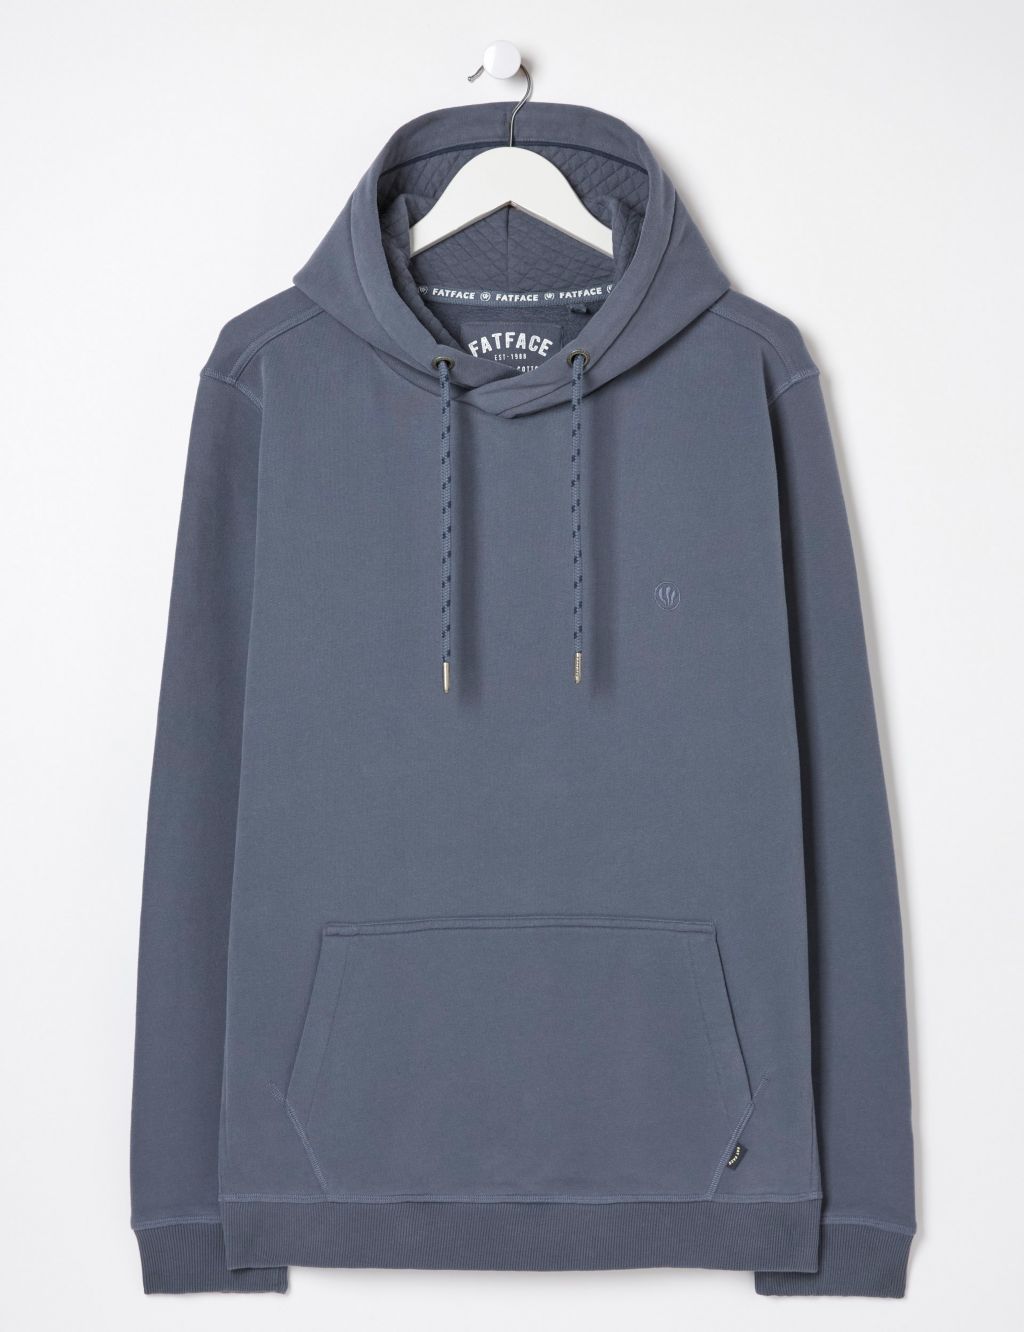 Cotton Rich Hoodie image 2